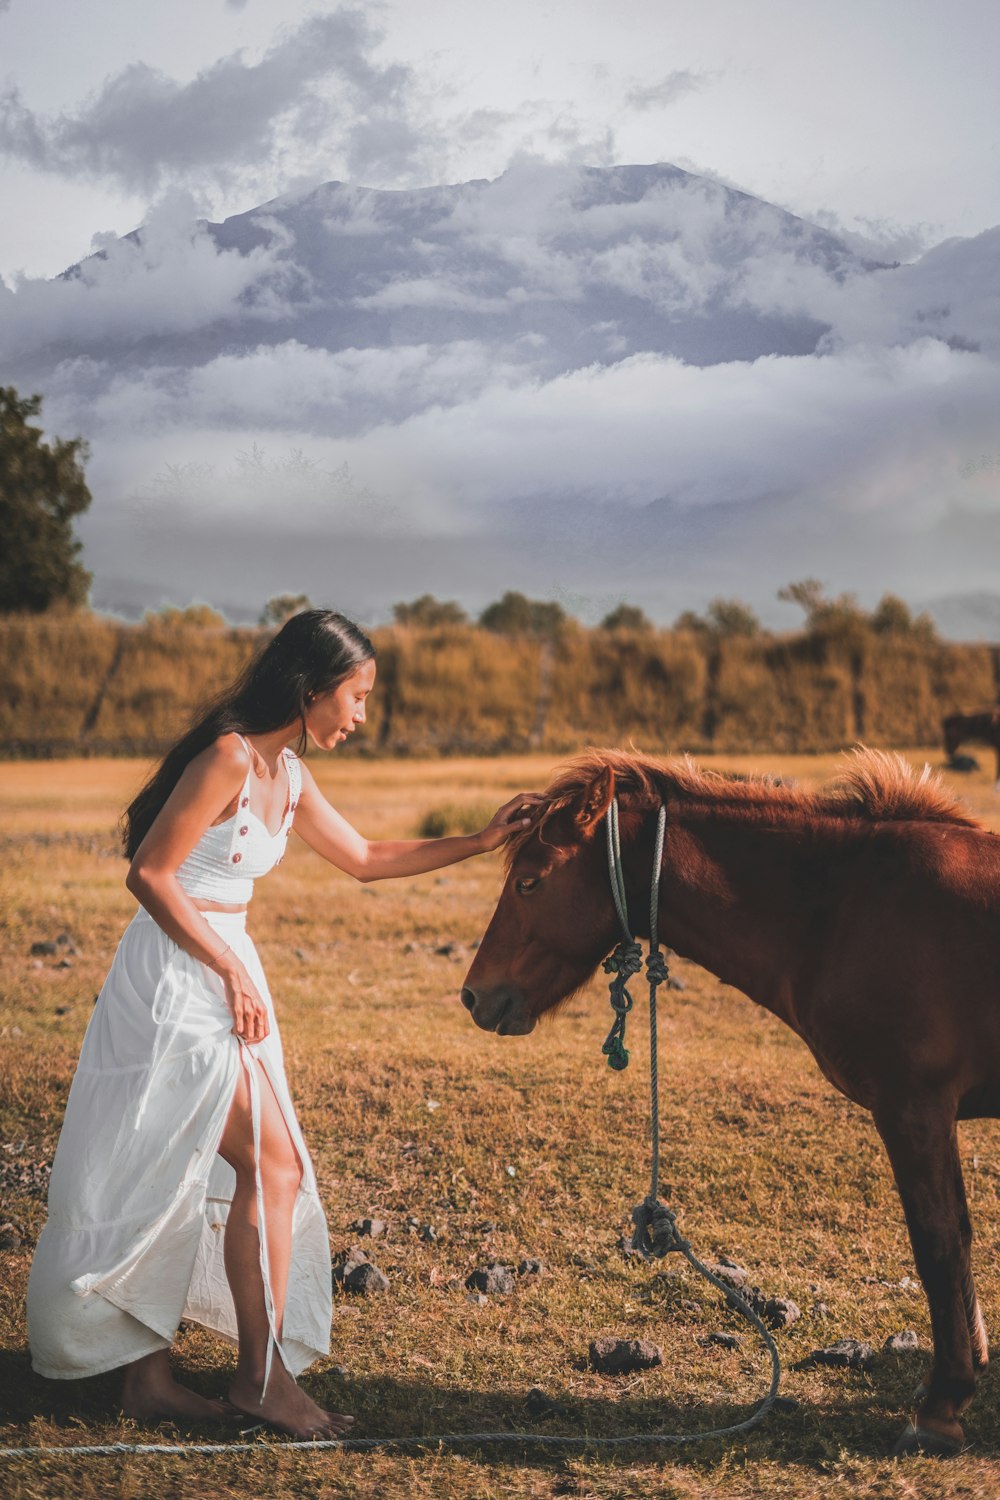 woman in white dress standing beside brown horse during daytime